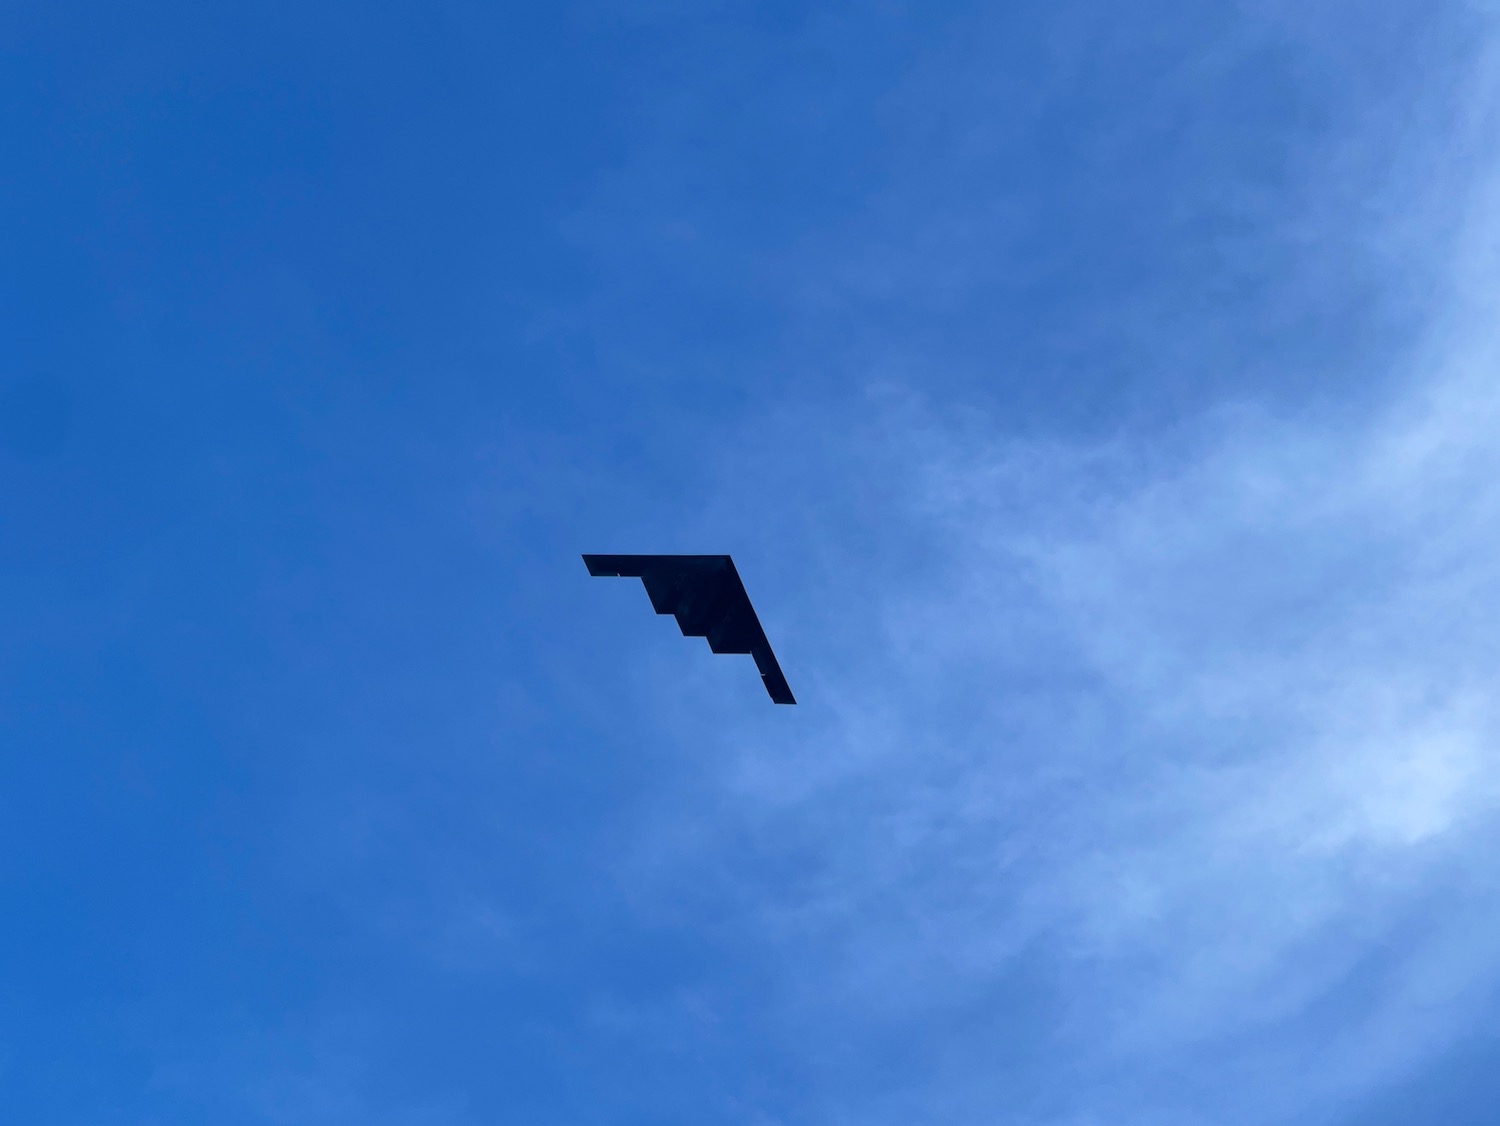 a black plane in the sky